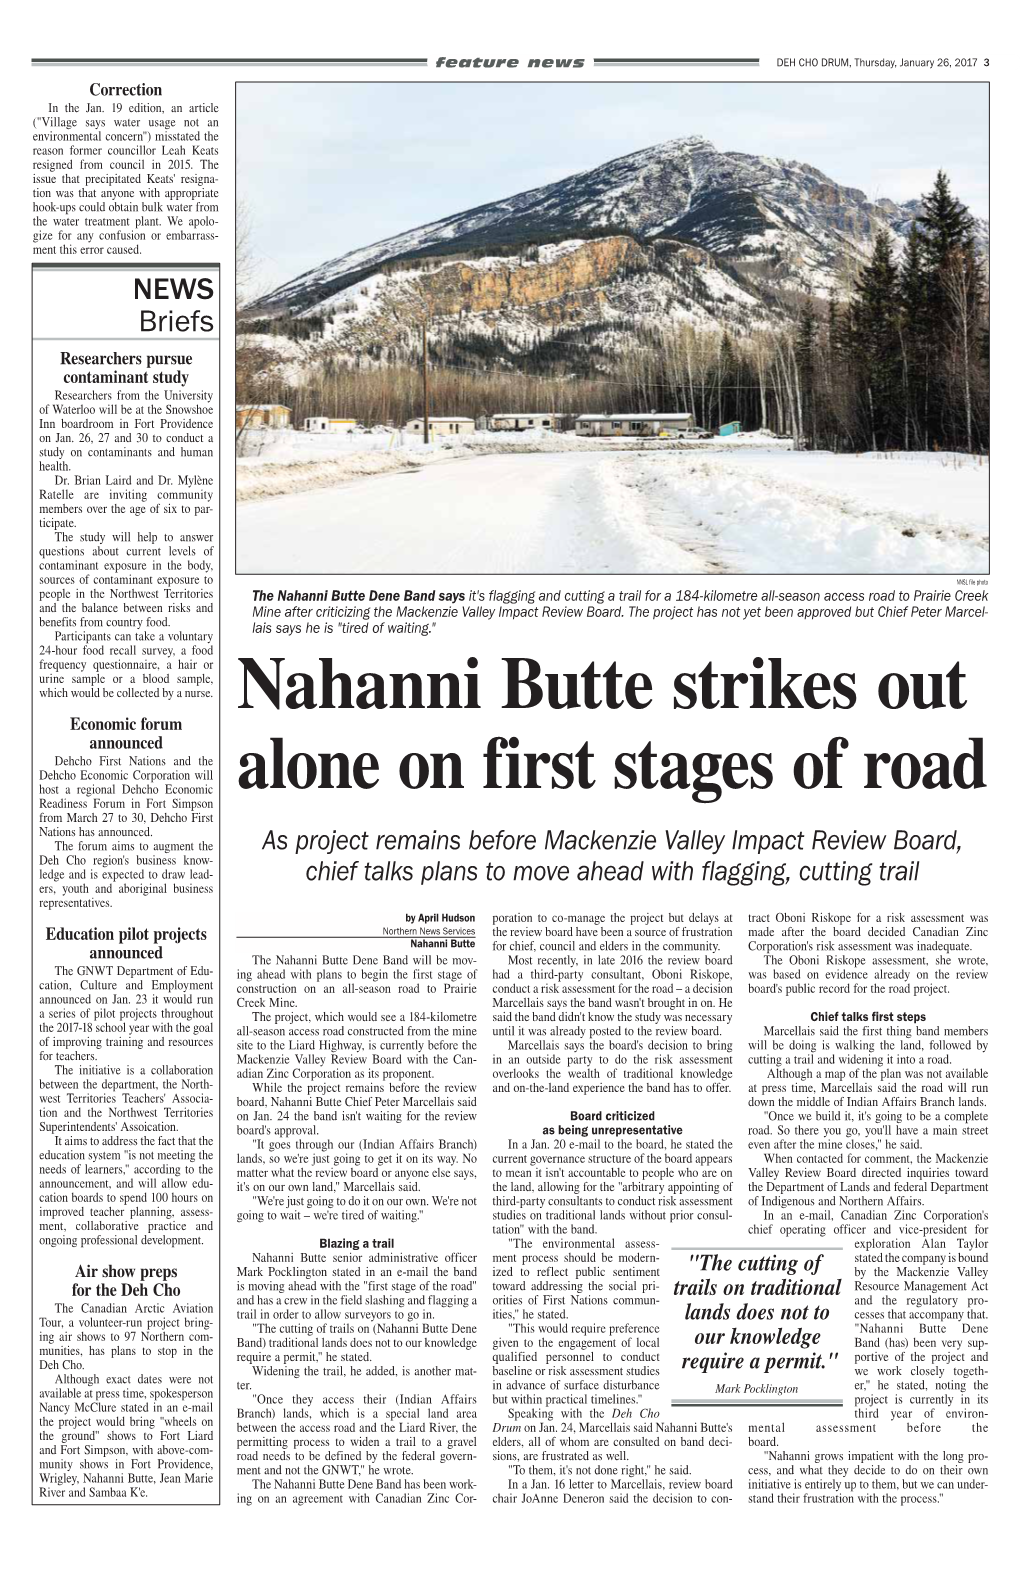 Nahanni Butte Strikes out Alone on First Stages of Road